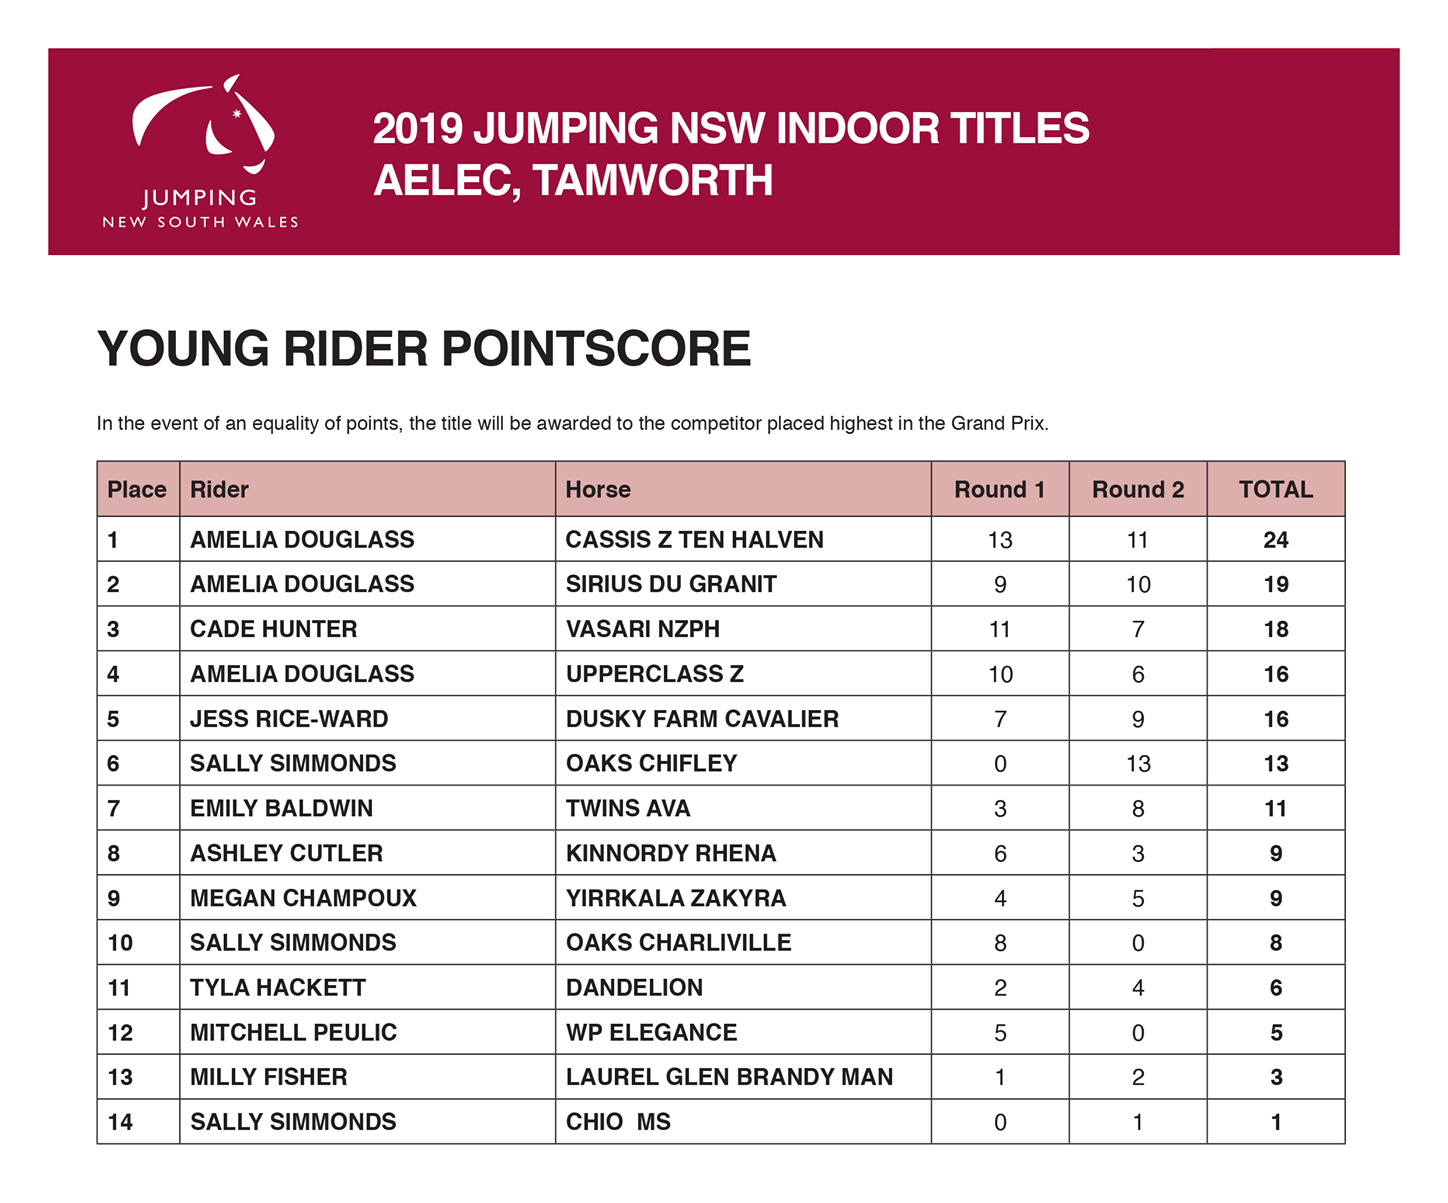 Tamworth Young Rider Pointscore